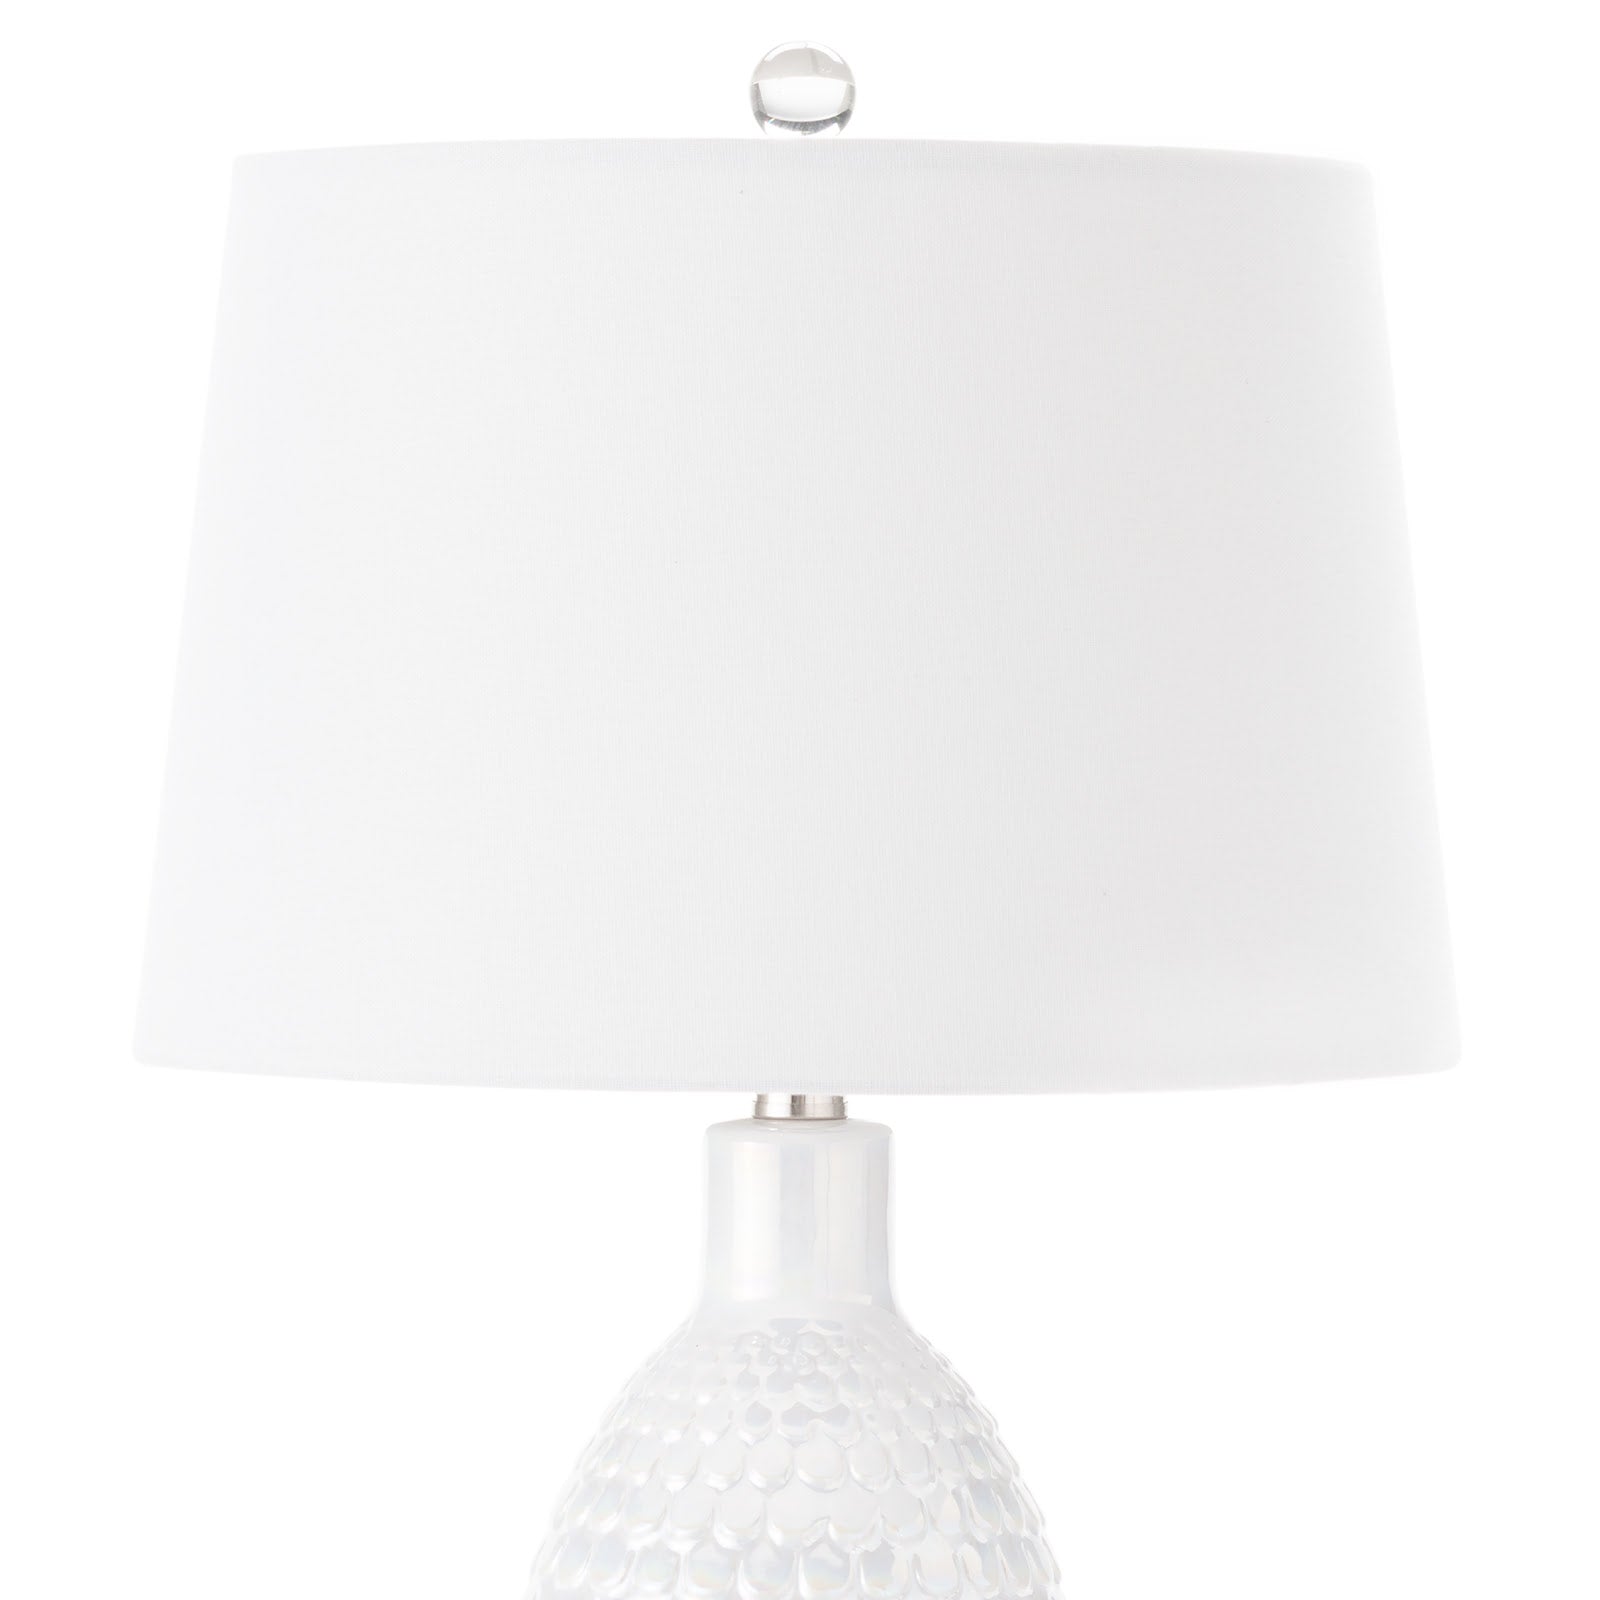 Glimmer Ceramic Table Lamp in Pearlized White by Coastal Living